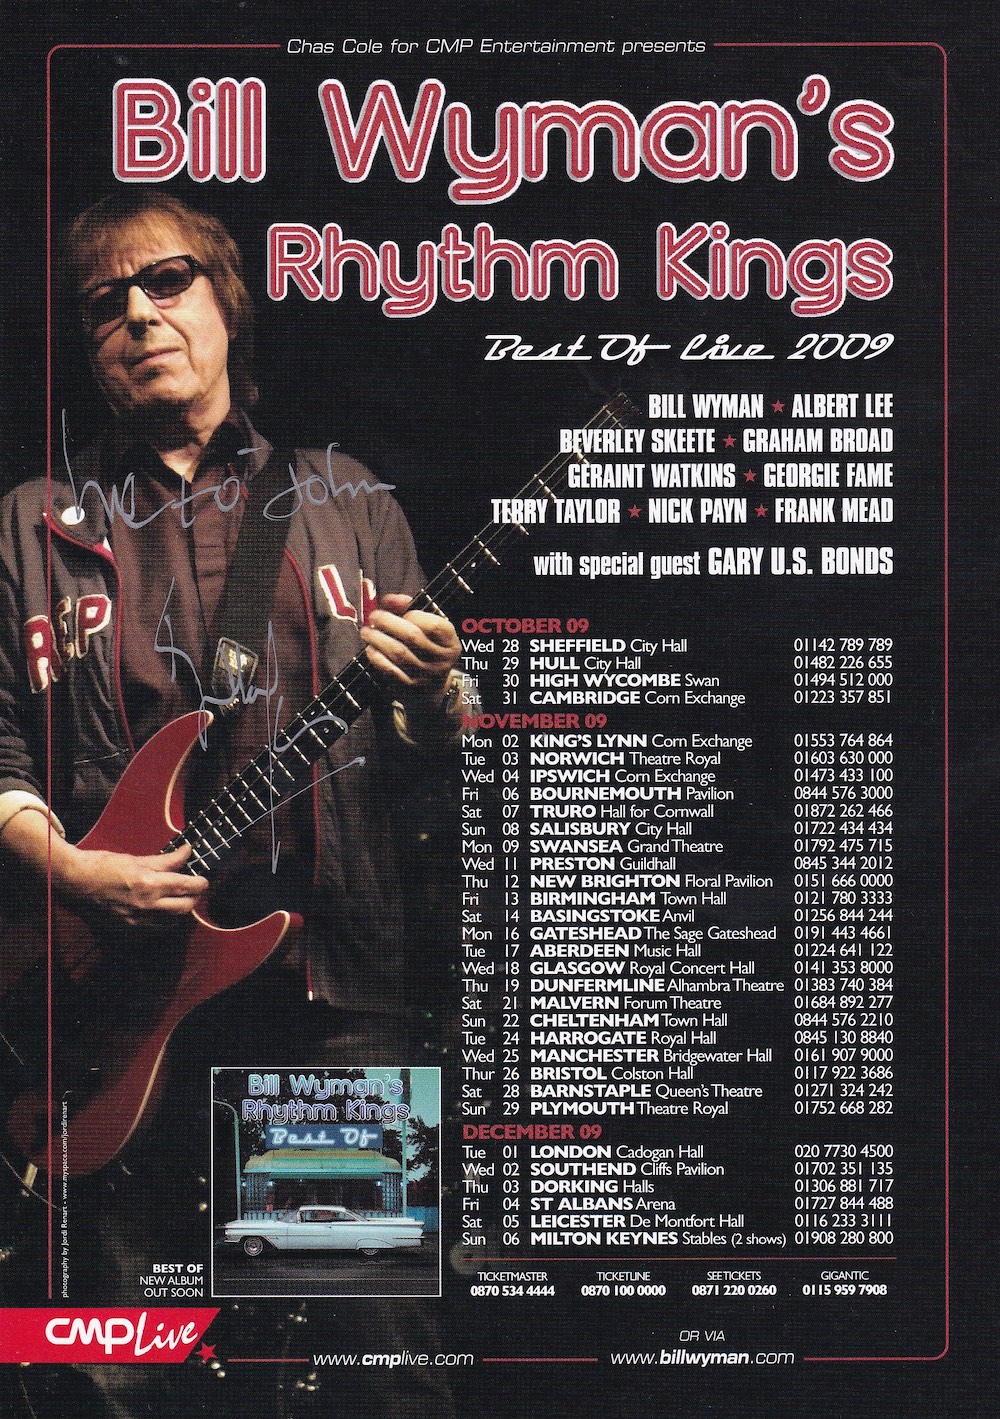 Bill Wyman Former Rolling Stones Band Member Signed Tour Flyer. Good Condition. All autographs